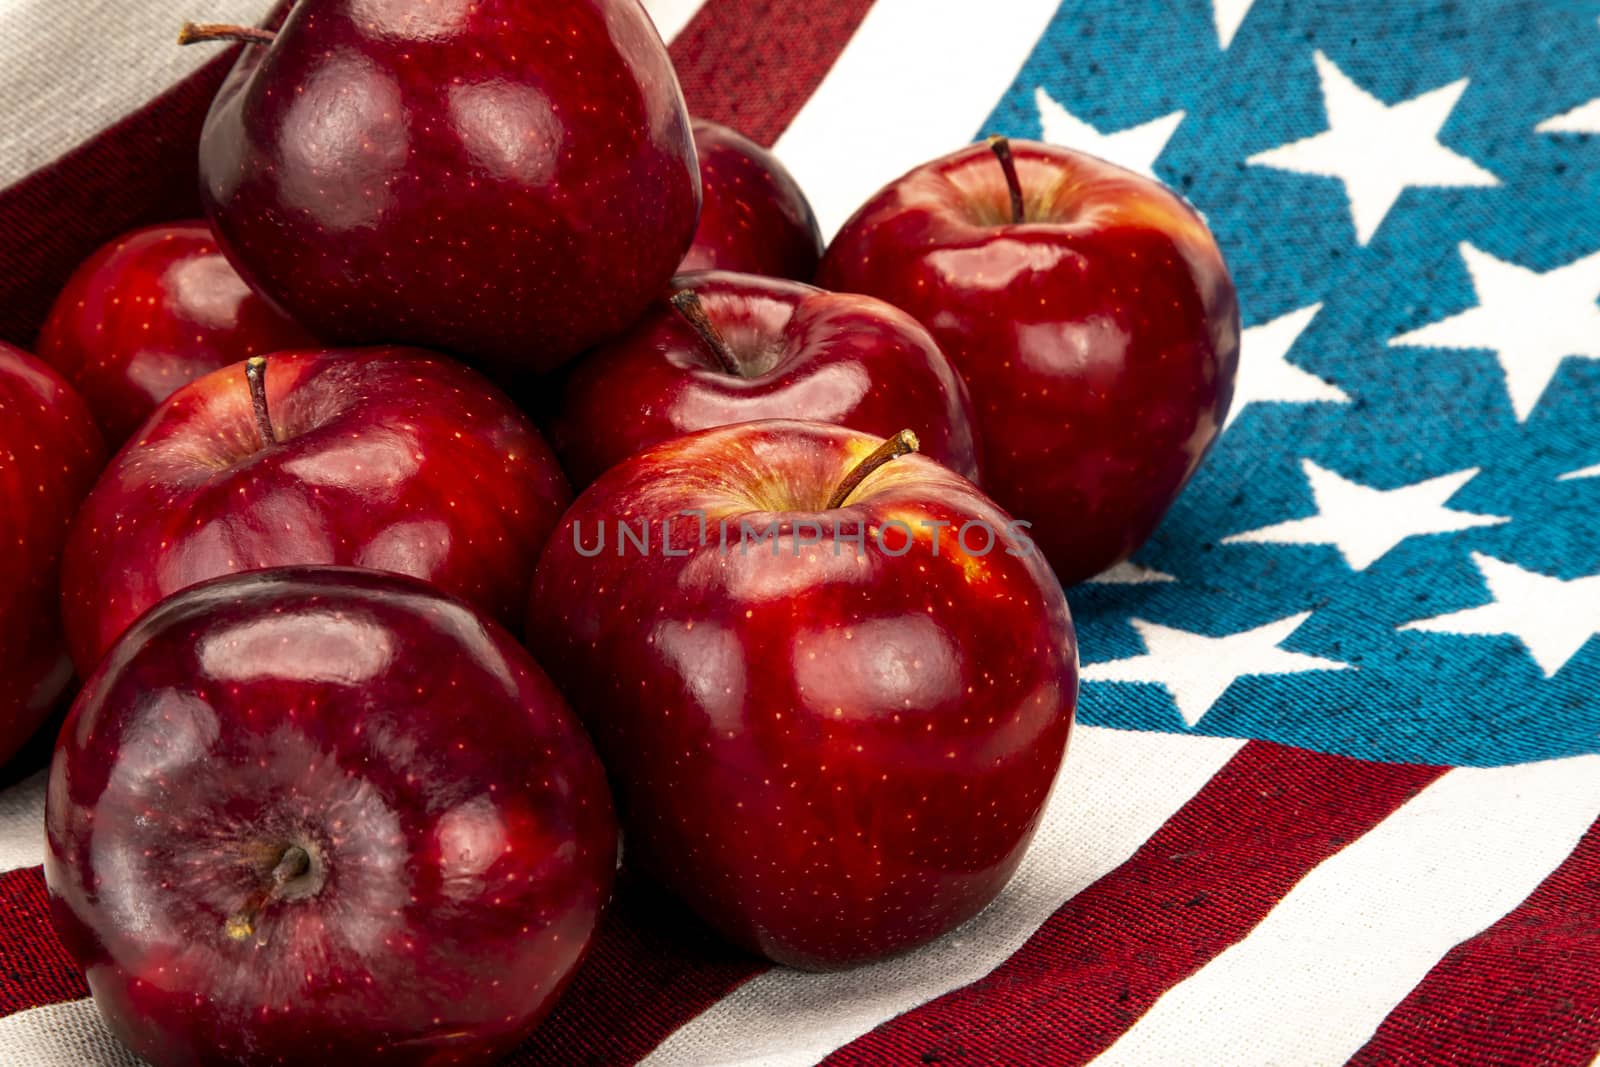 Pile of red apples on a cotton cloth with white stars on blue background and red and white stripes pattern.